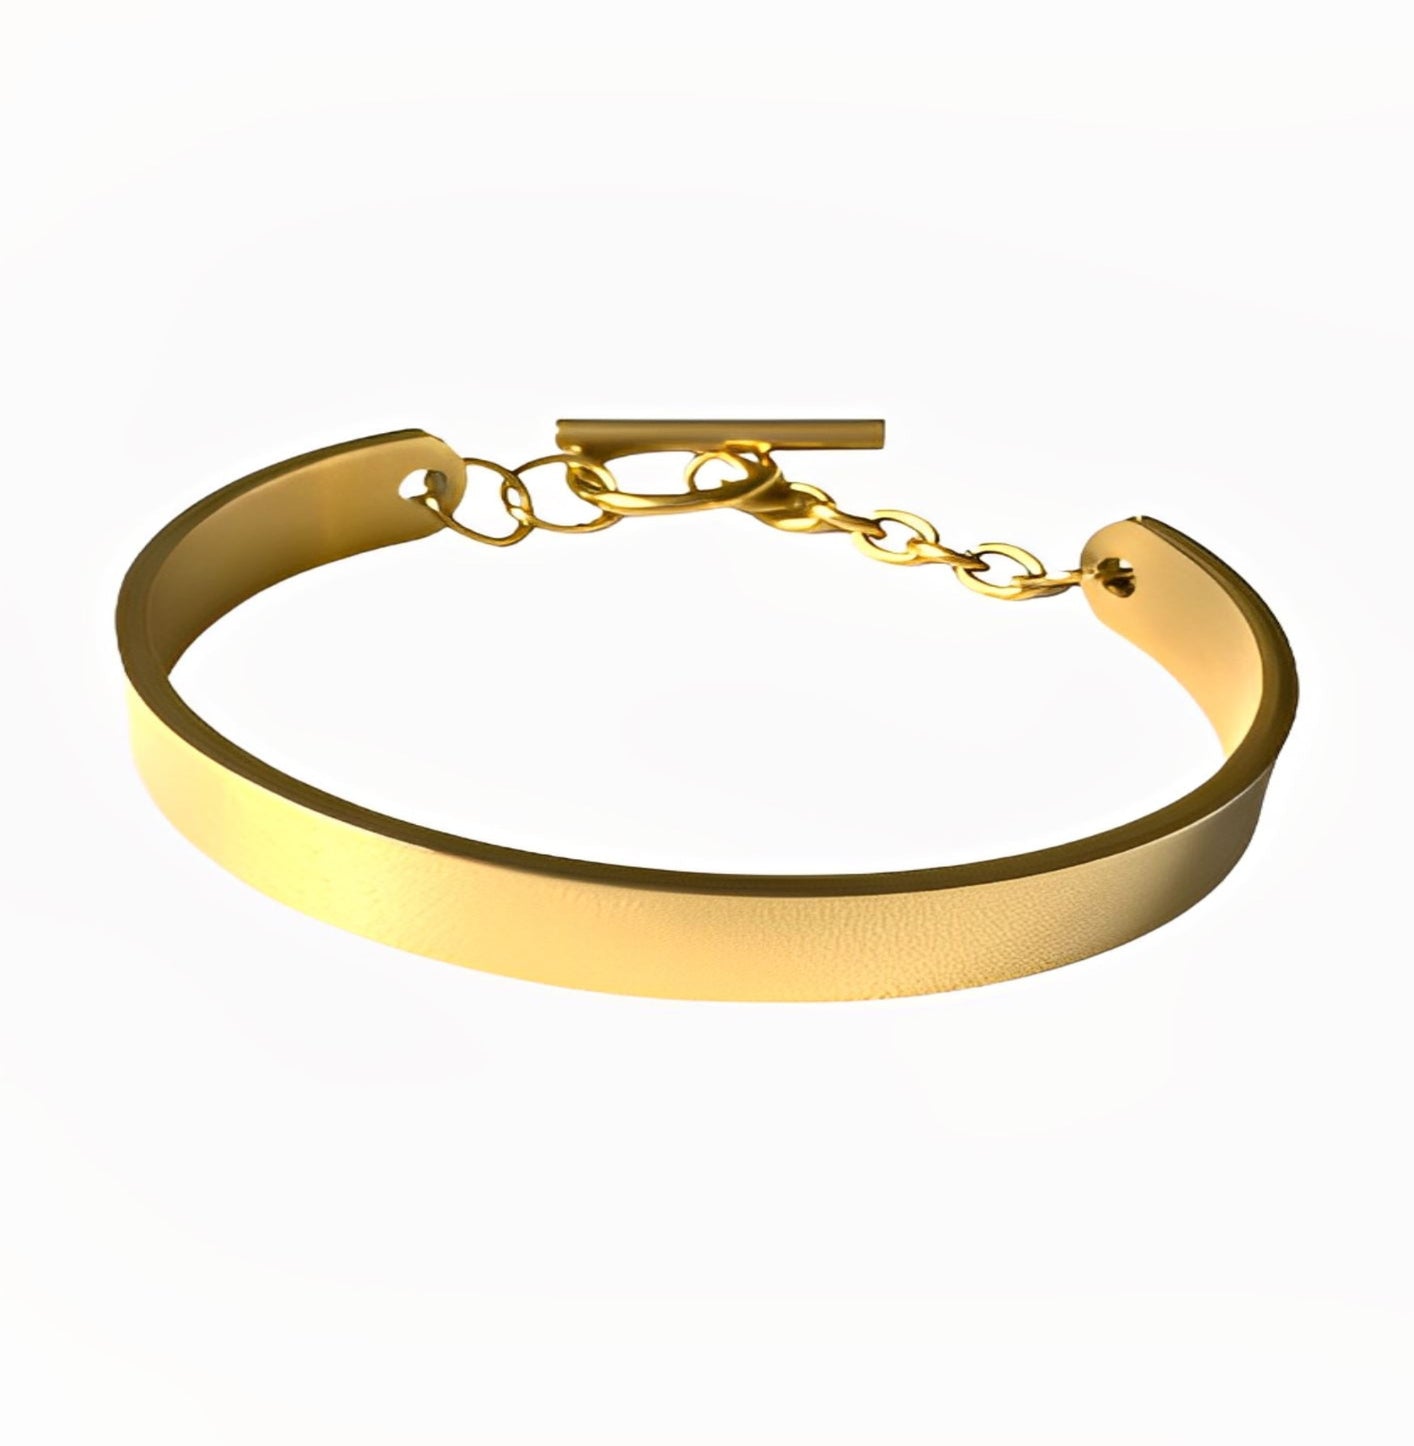 DOME CUFF BRACELET braclet Yubama Jewelry Online Store - The Elegant Designs of Gold and Silver ! 